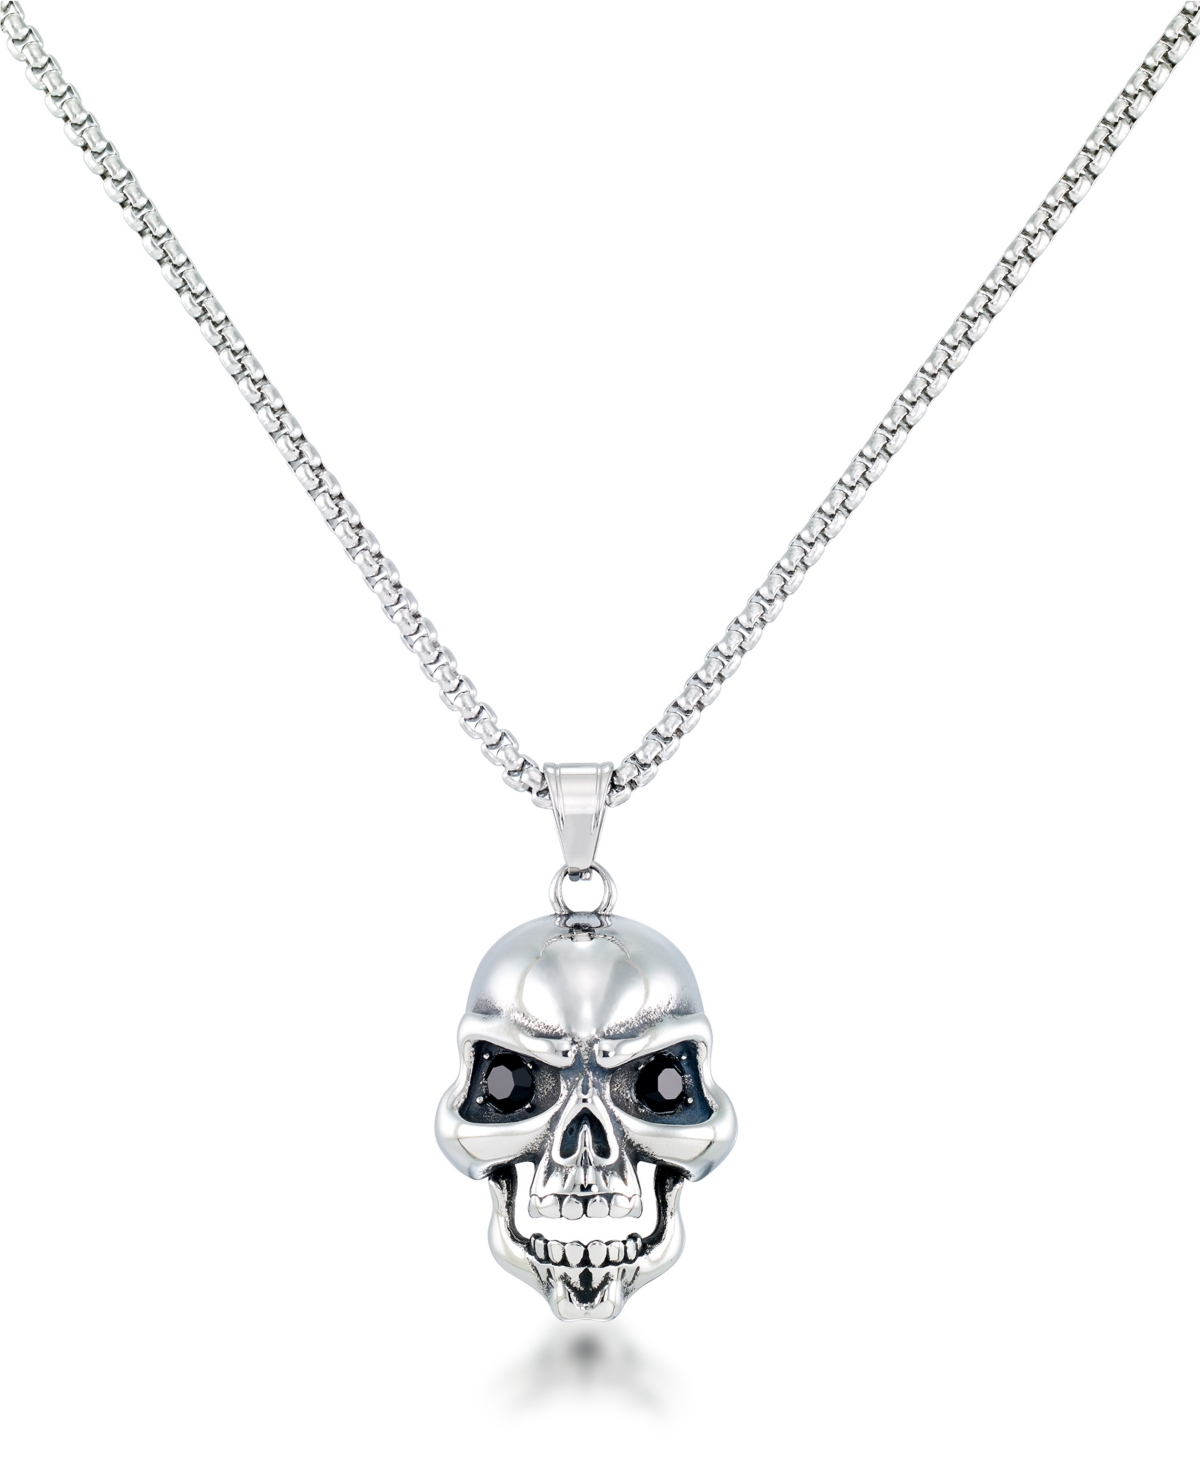 Andrew Charles by Andy Hilfiger Men's Black Cubic Zirconia Skull 24" Pendant Necklace in Stainless Steel